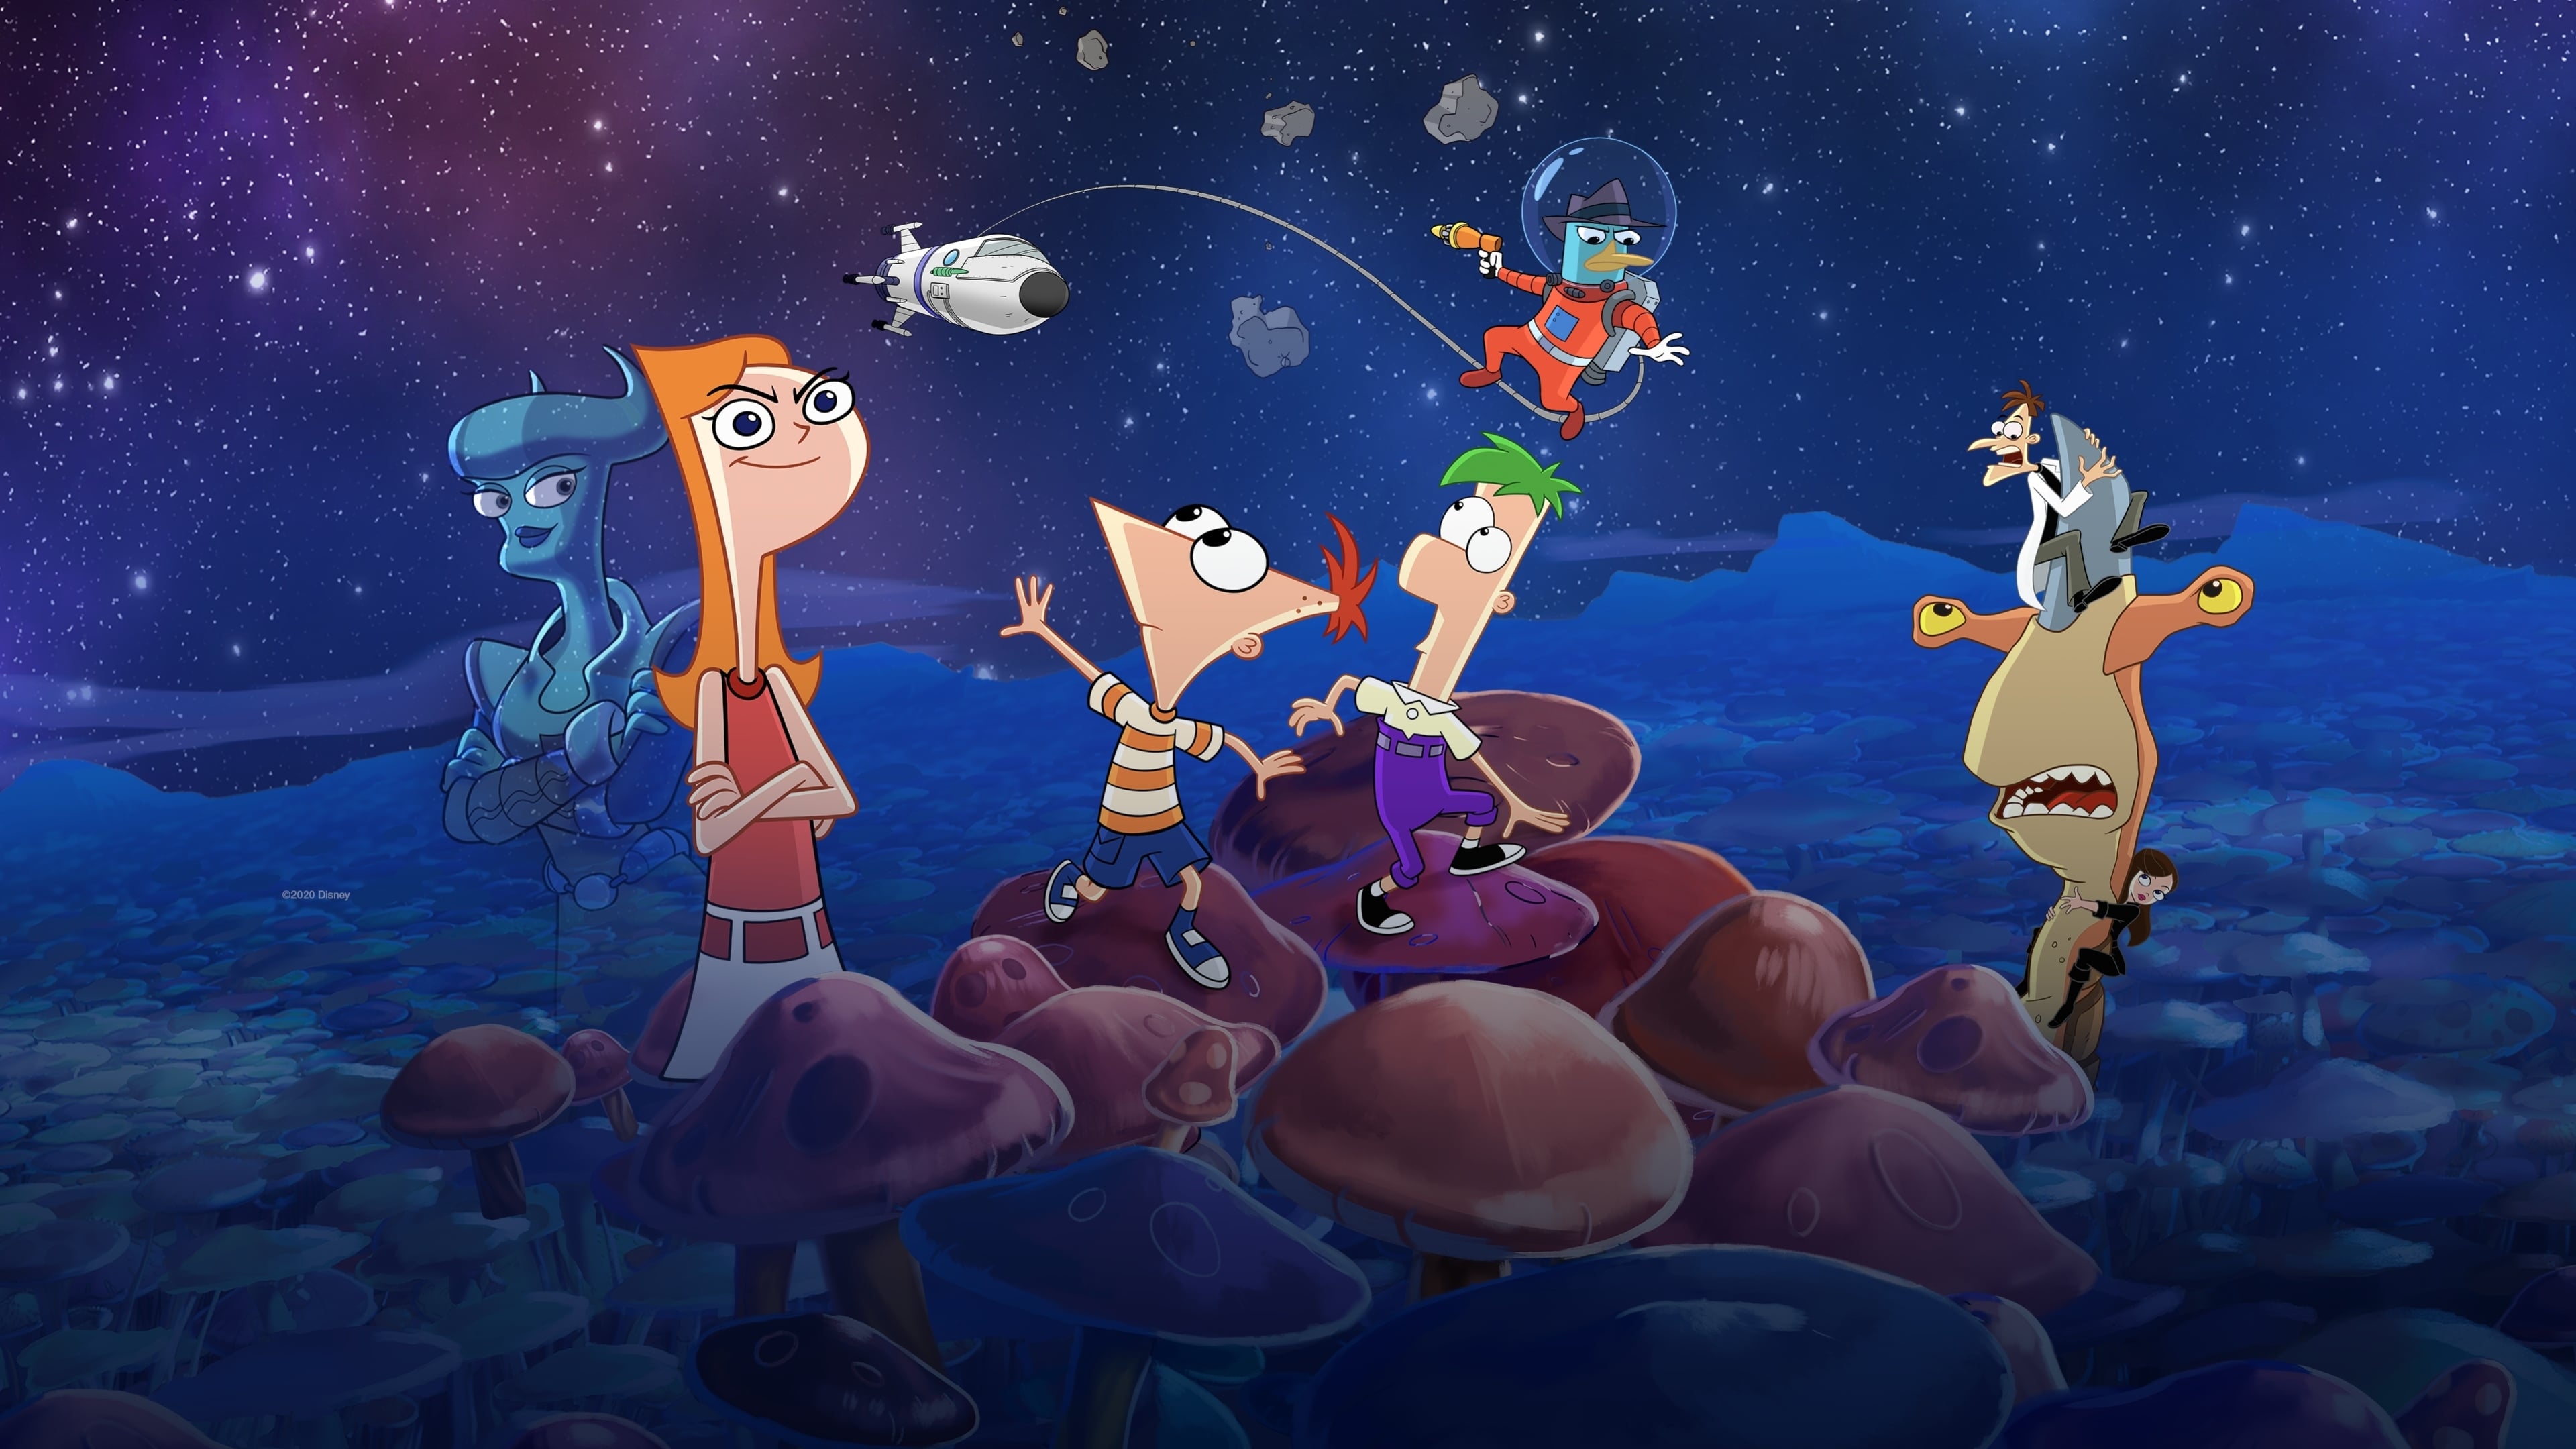 Tapeta filmu Phineas a Ferb ve filmu: Candy proti Vesmíru / Phineas and Ferb the Movie: Candace Against the Universe (2020)